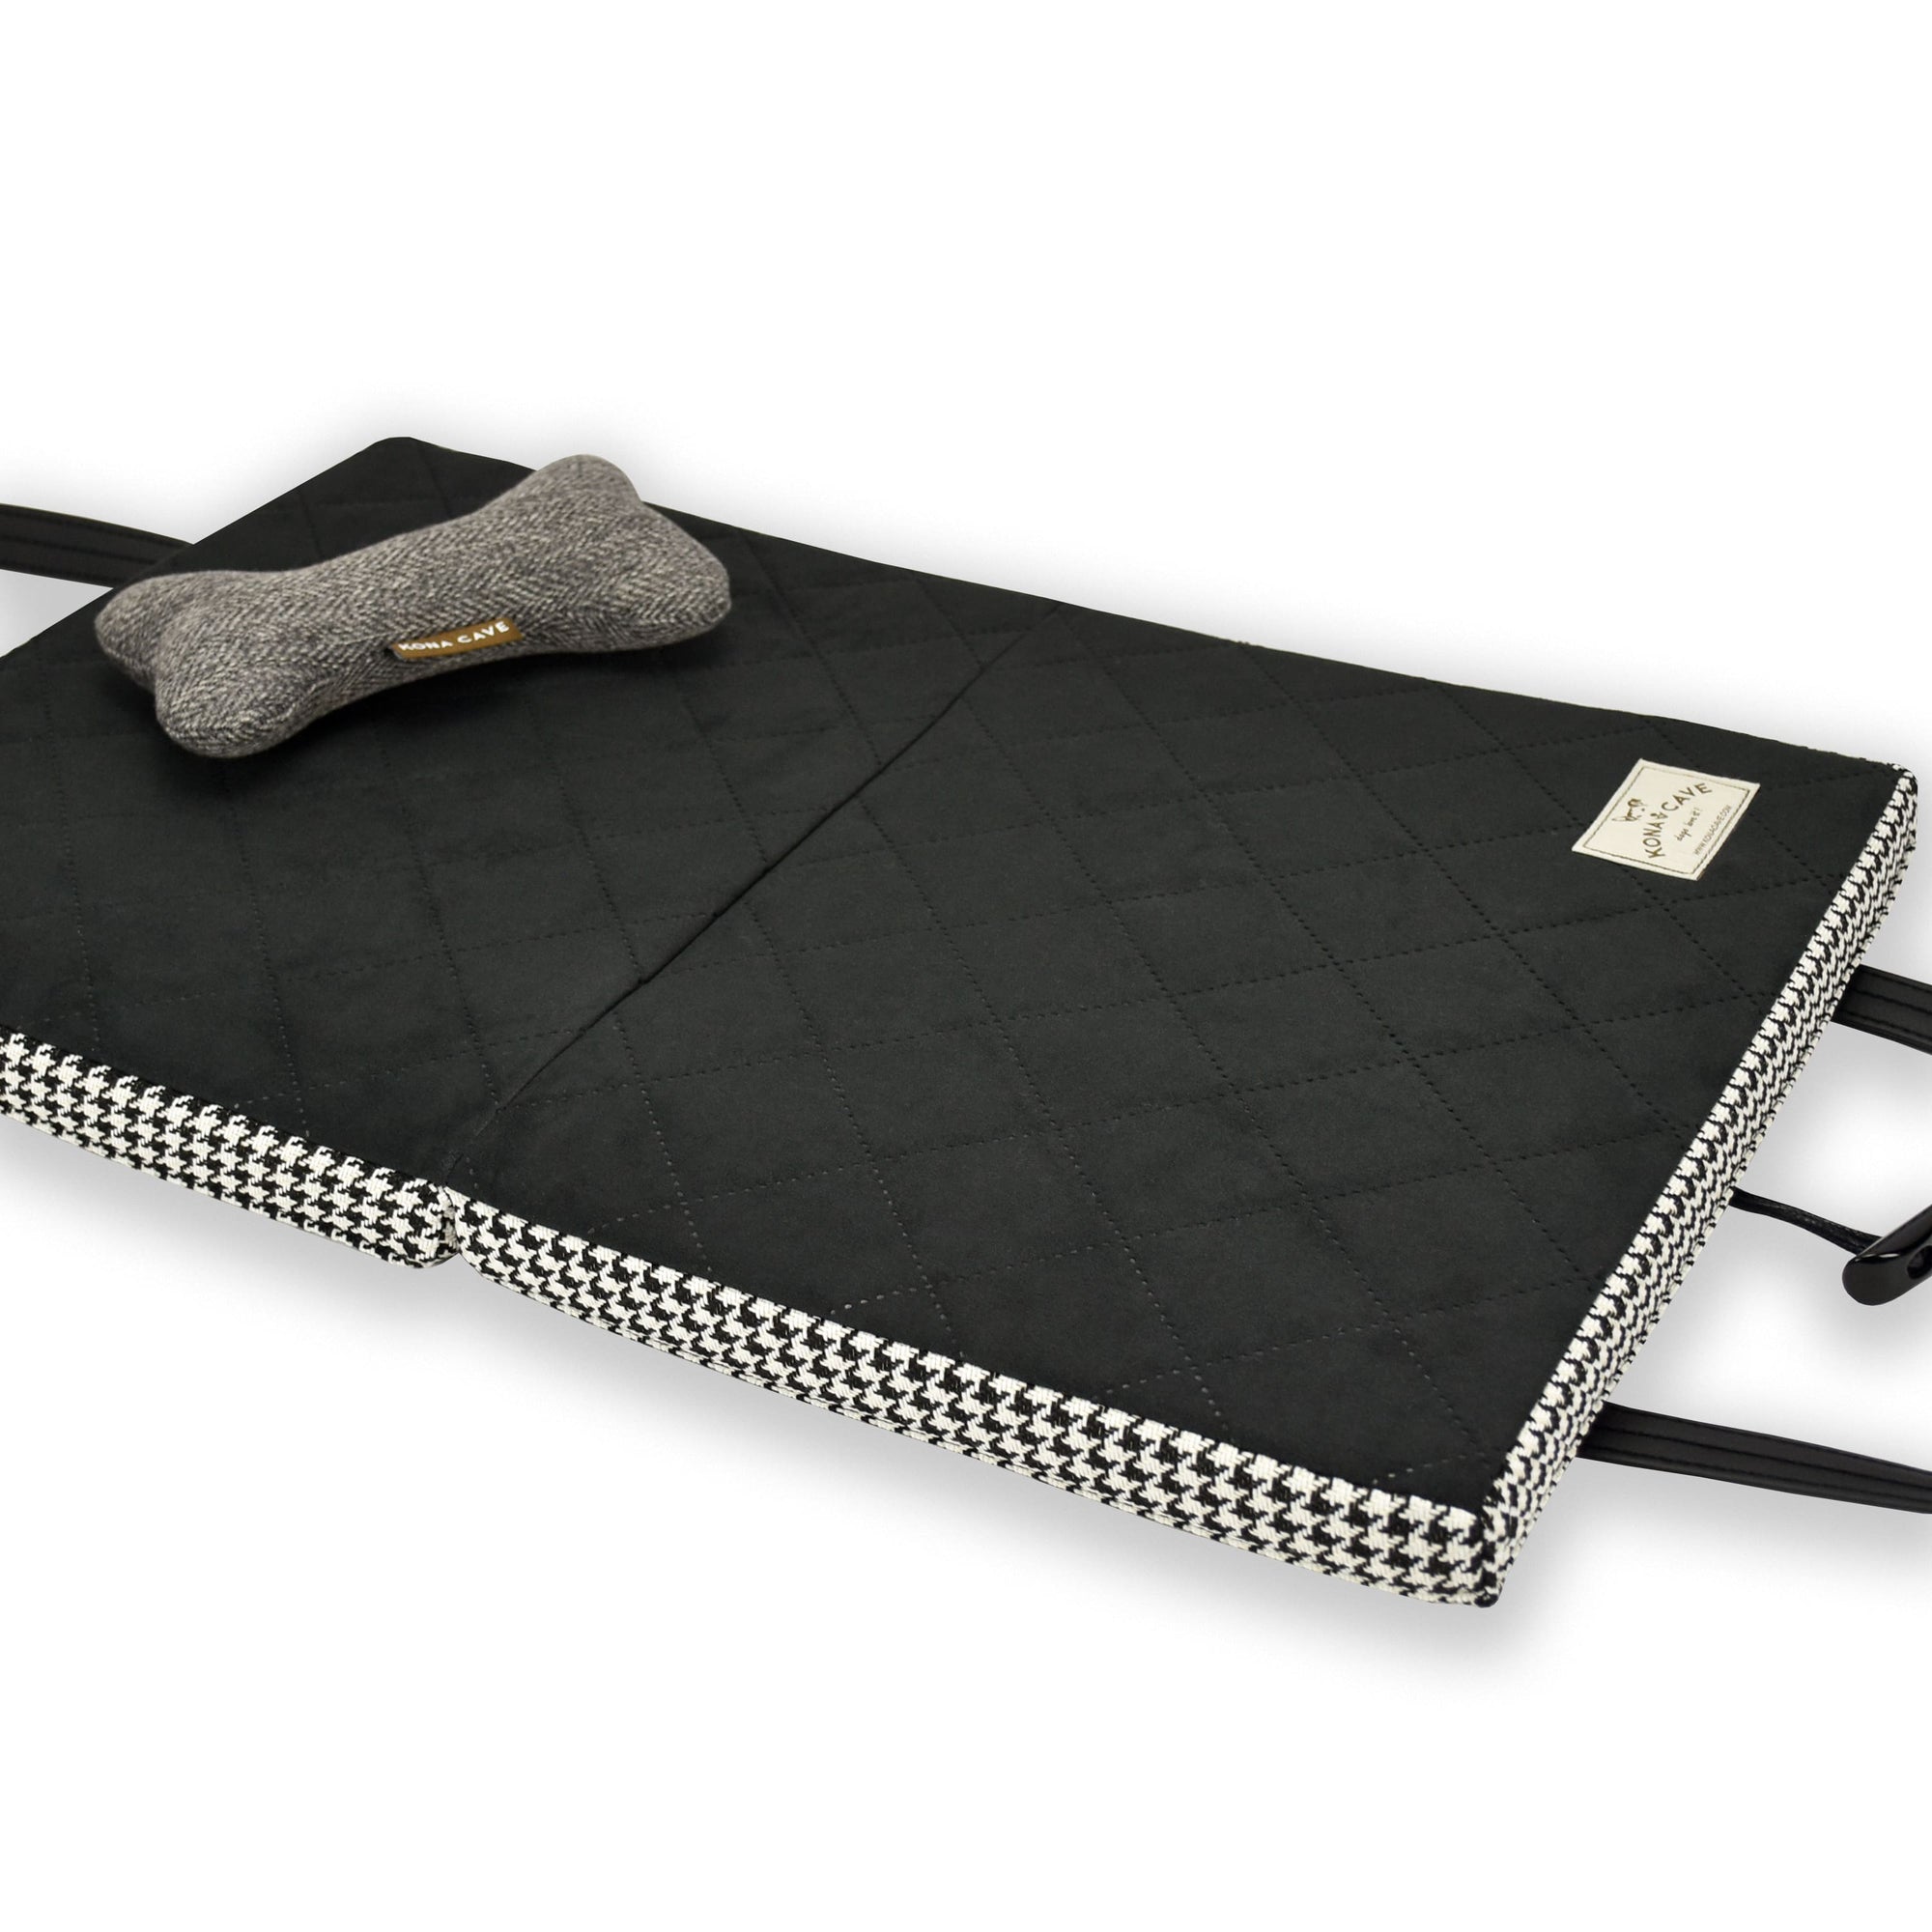 Open KONA CAVE® Travel Dog Bed in Black and White Houndstooth with Black Quilted Ultra-Suede Lining with a Toy Dog Bone on top. Padded restaurant dog bed.